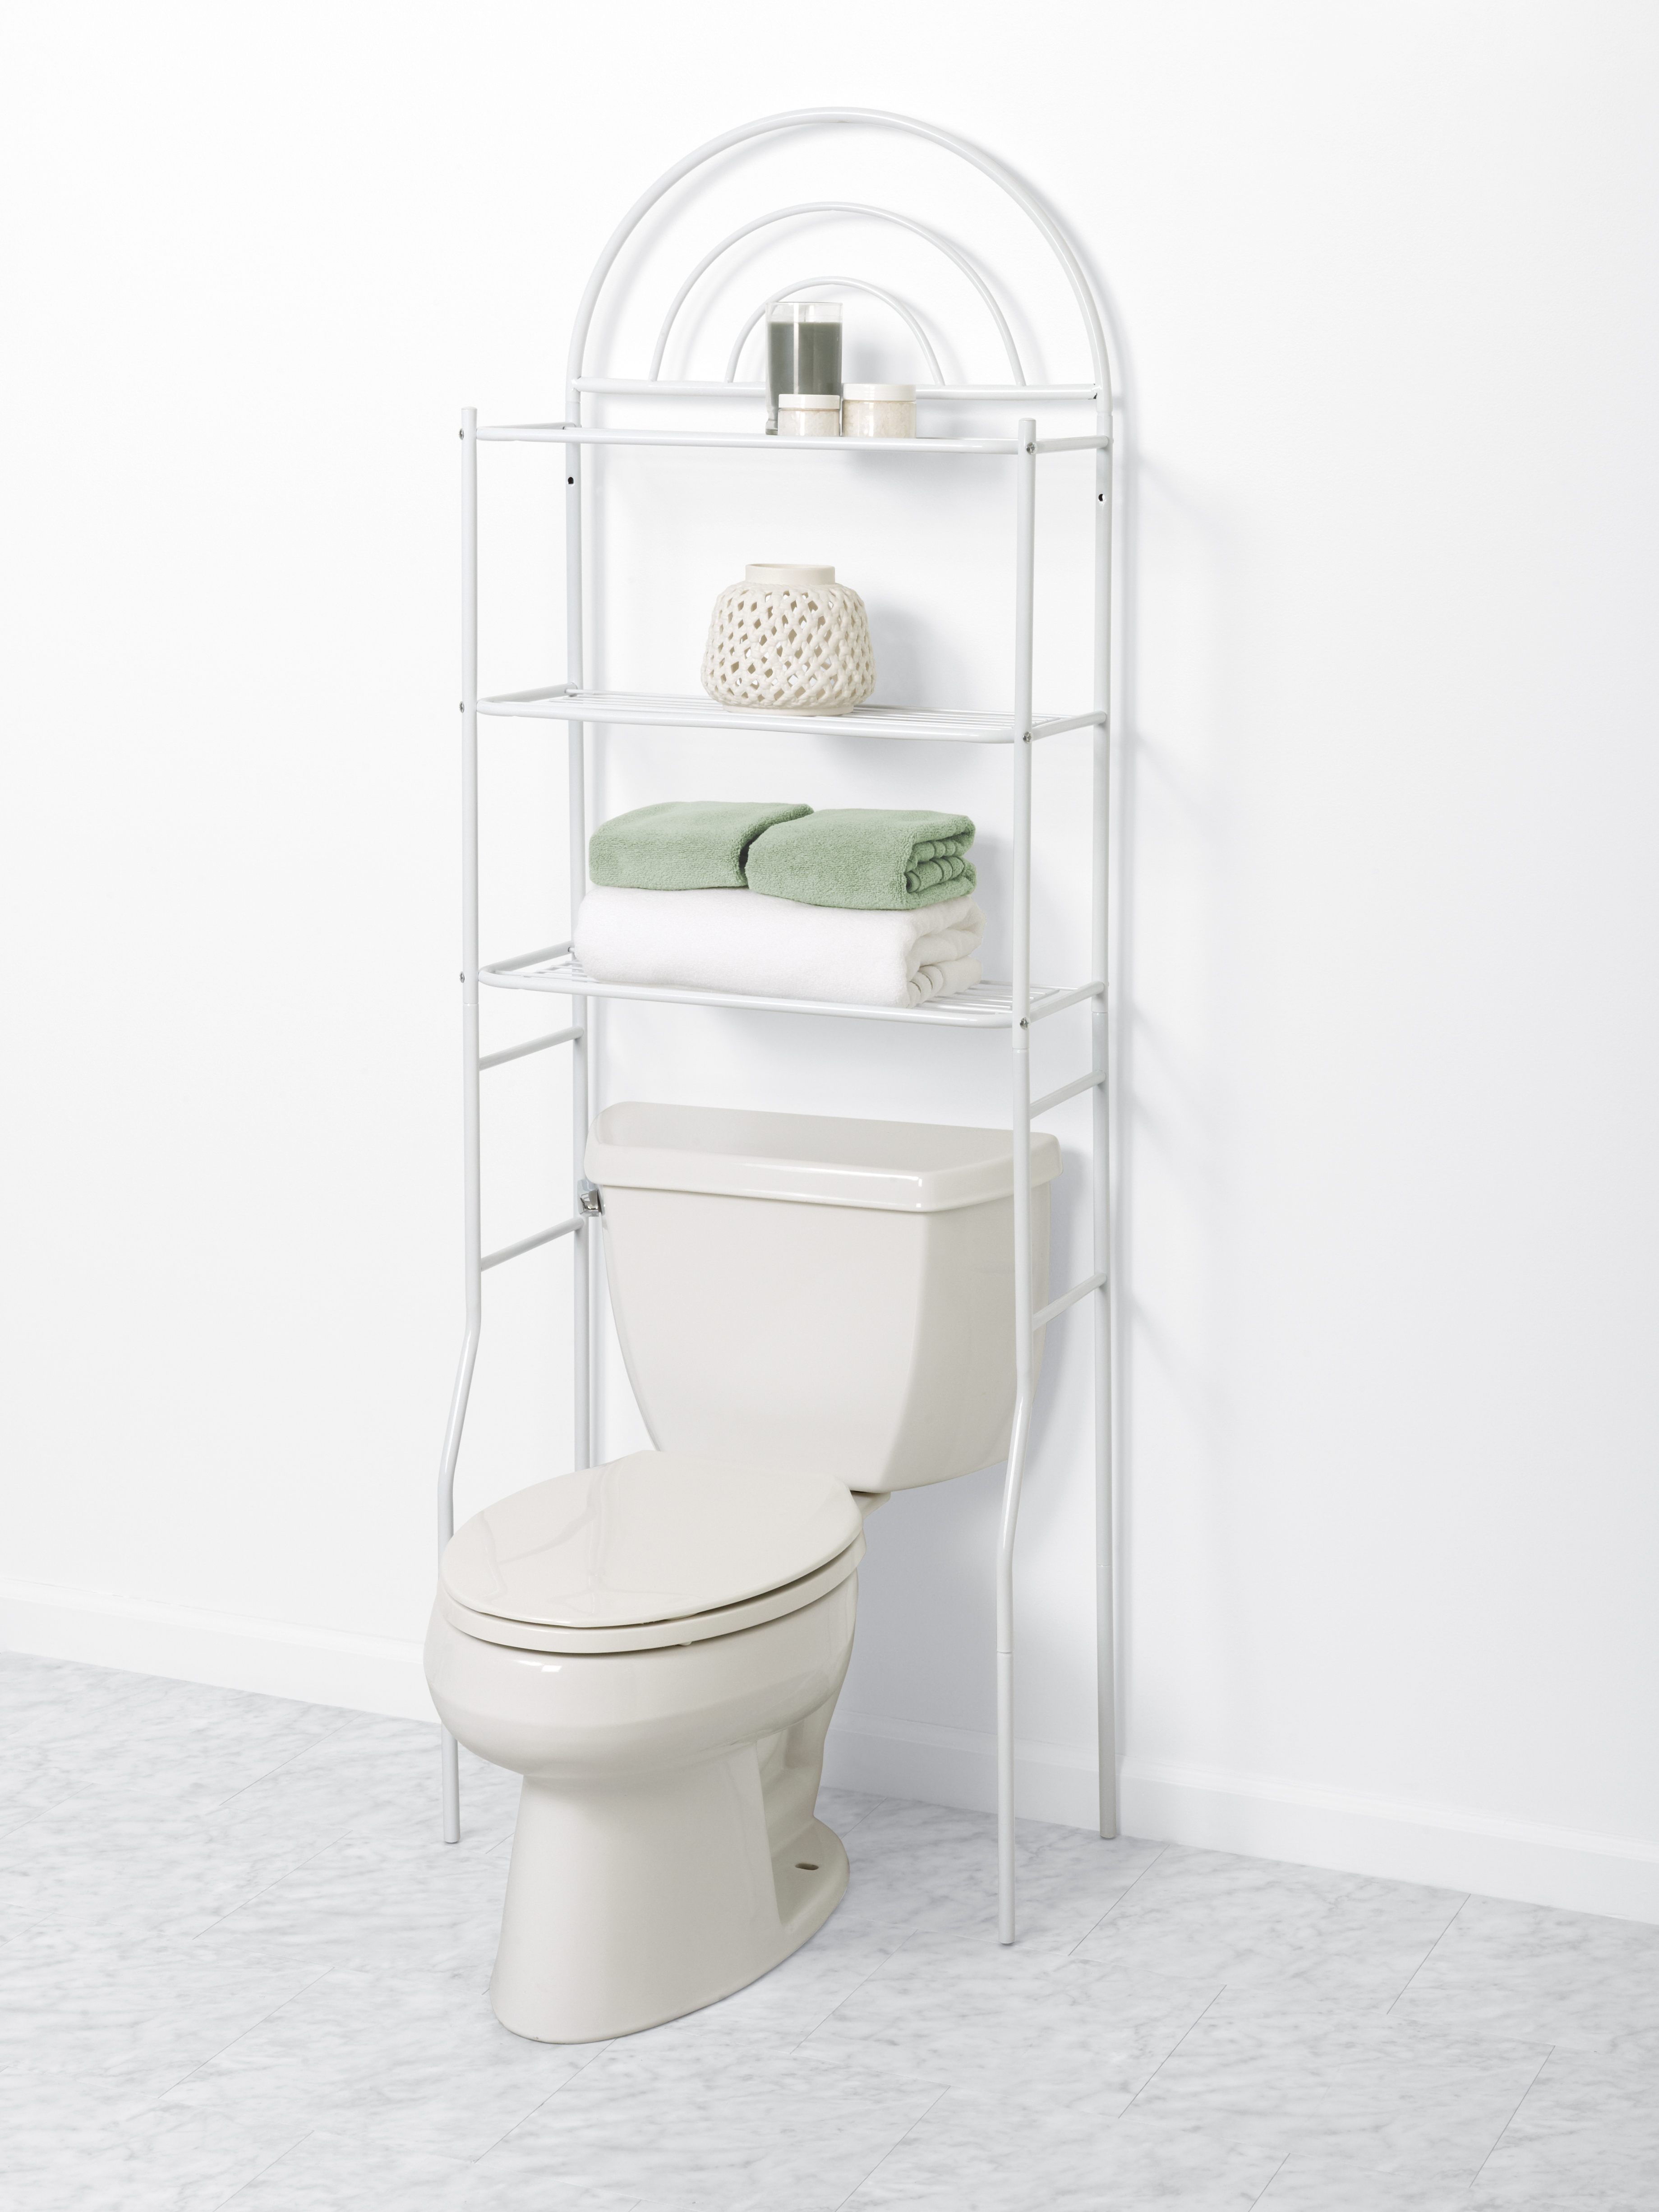 Zenna Home over-the-Toilet Bathroom Spacesaver with 3 Storage Shelves, Metal Arch-Style, White - image 2 of 5